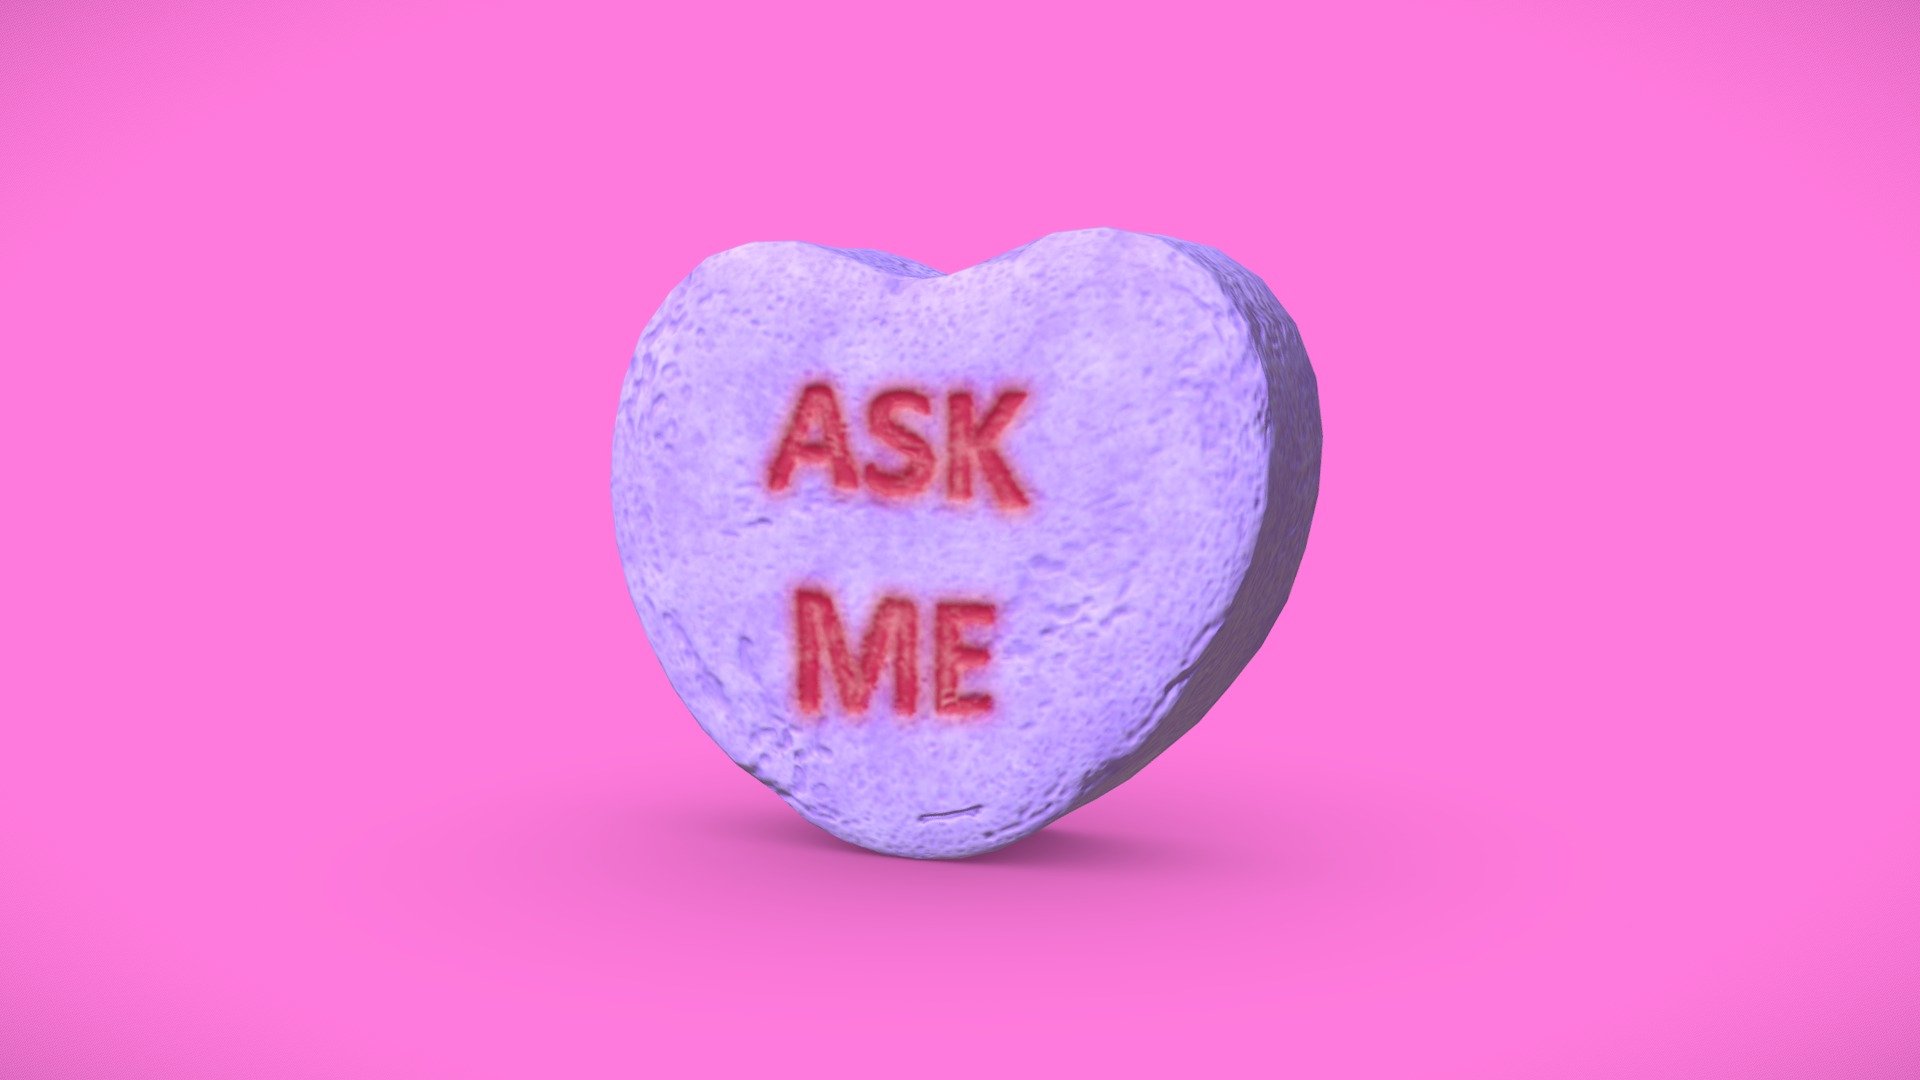 Heart Candy - Ask Me